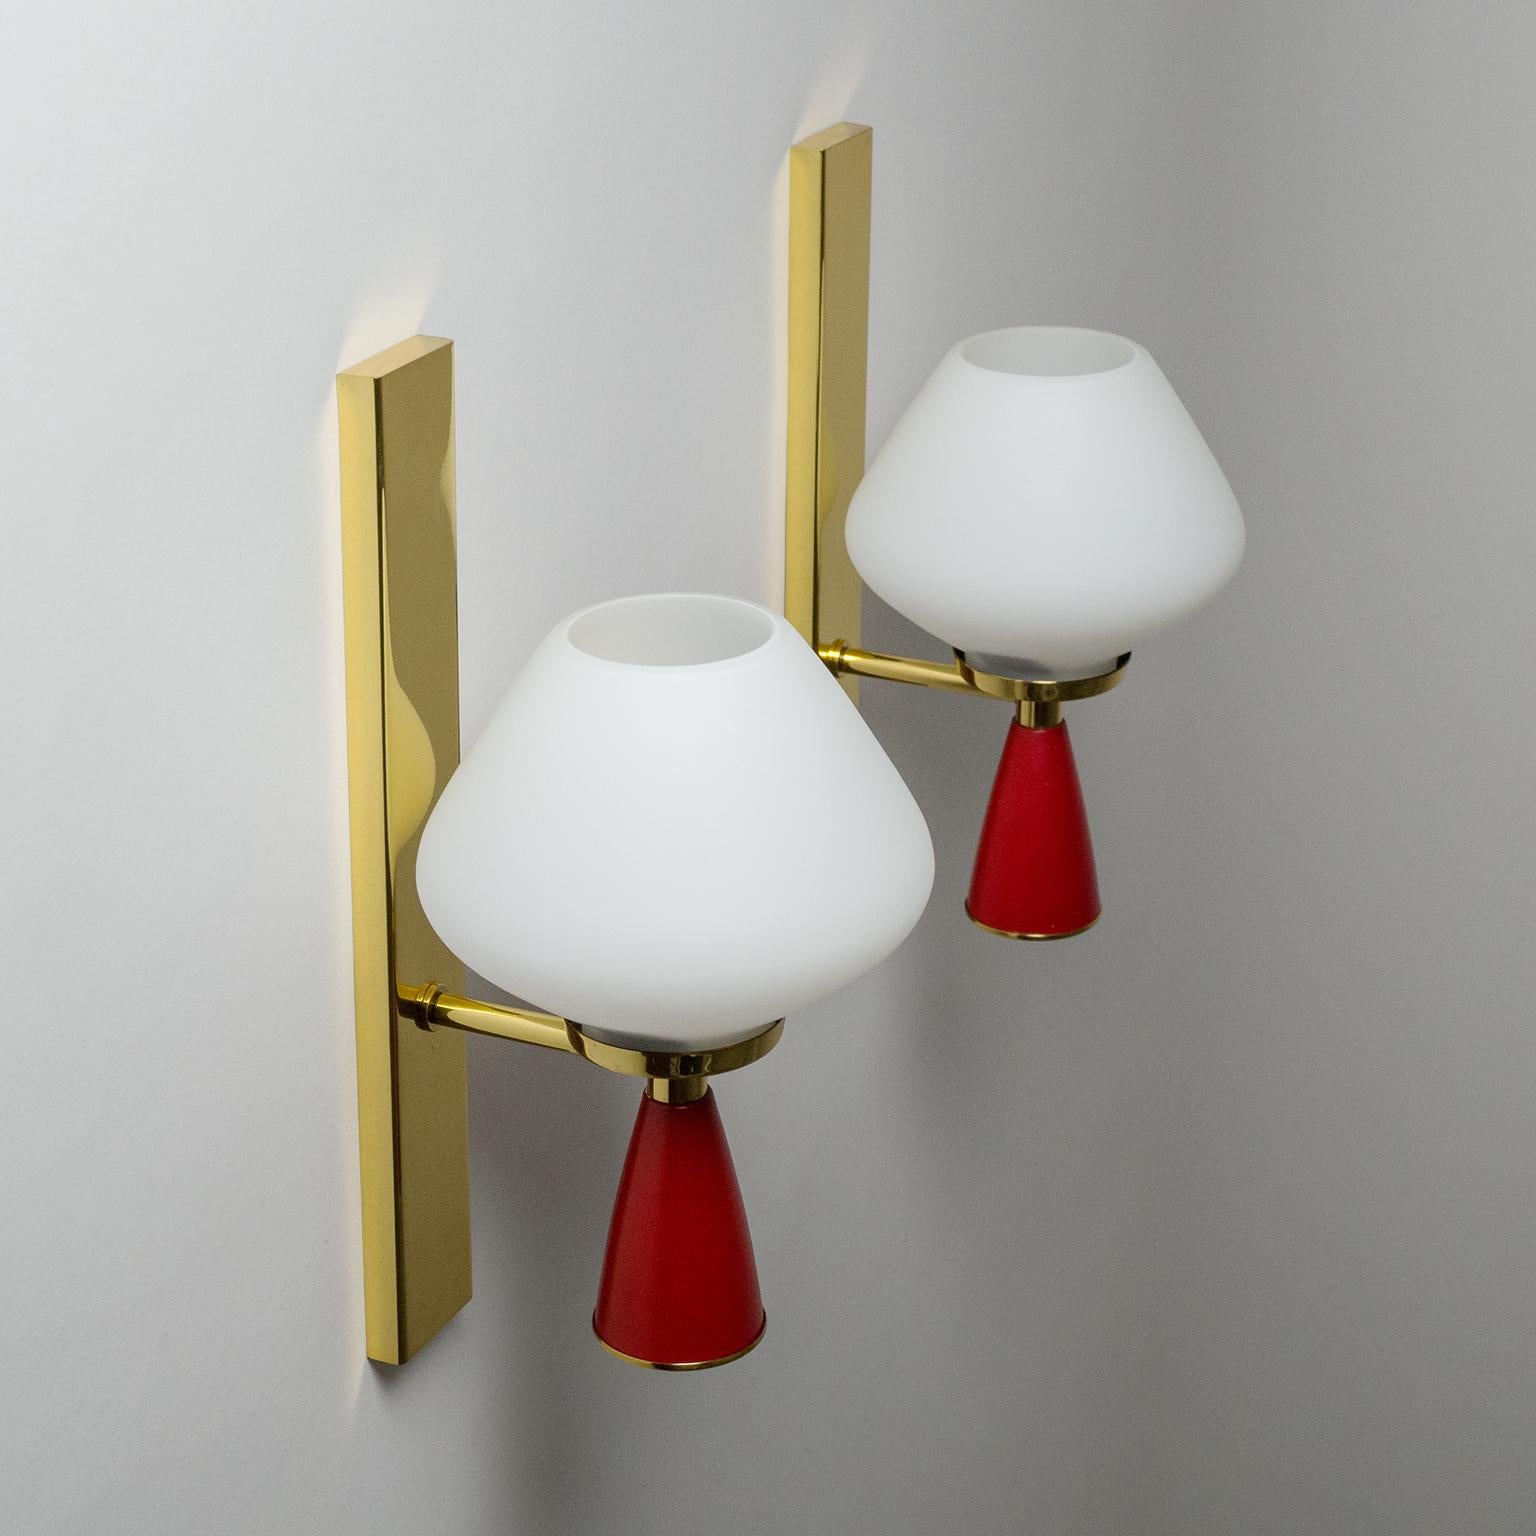 Italian Satin Glass Sconces, 1950s, Brass and Red 2